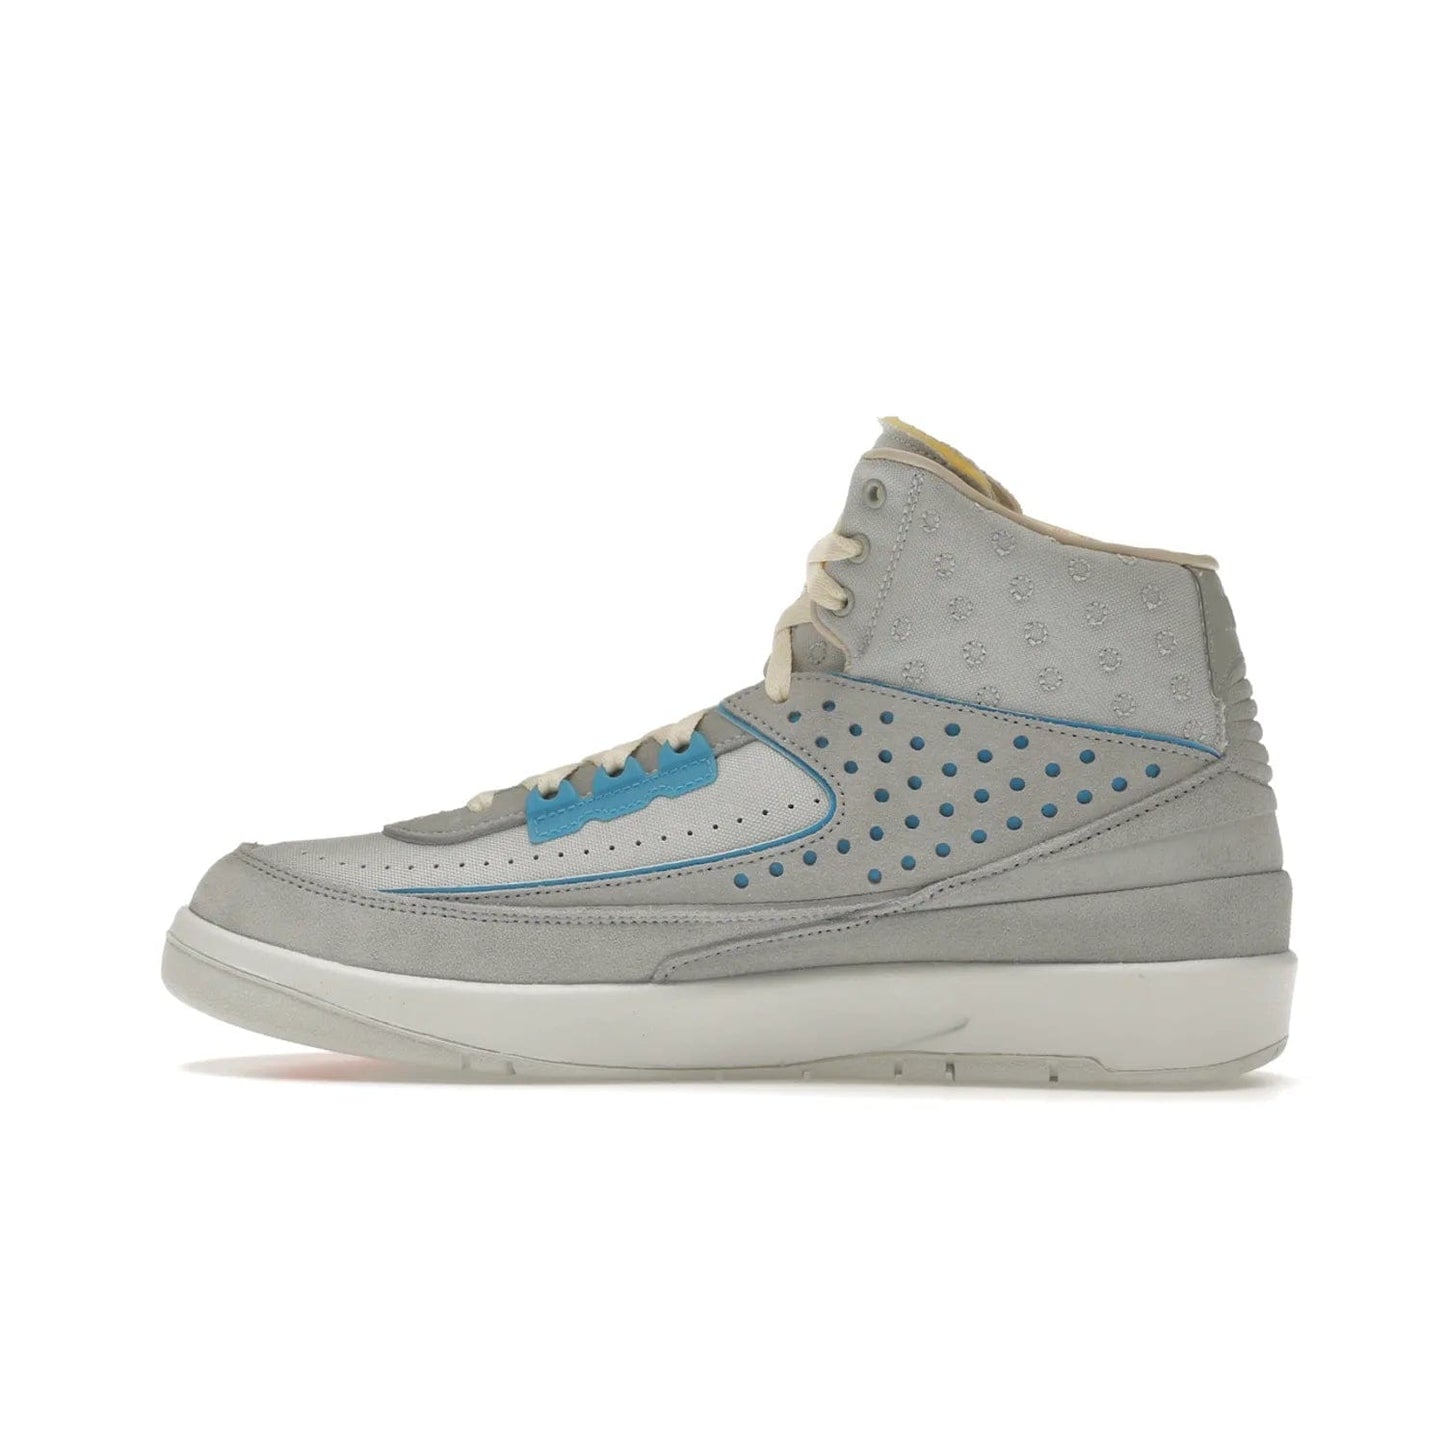 Jordan 2 Retro SP Union Grey Fog - Image 20 - Only at www.BallersClubKickz.com - Introducing the Air Jordan 2 Retro SP Union Grey Fog. This intricate sneaker design features a grey canvas upper with light blue eyelets, eyestay patches, and piping, plus custom external tags. Dropping in April 2022, this exclusive release offers a worn-in look and feel.